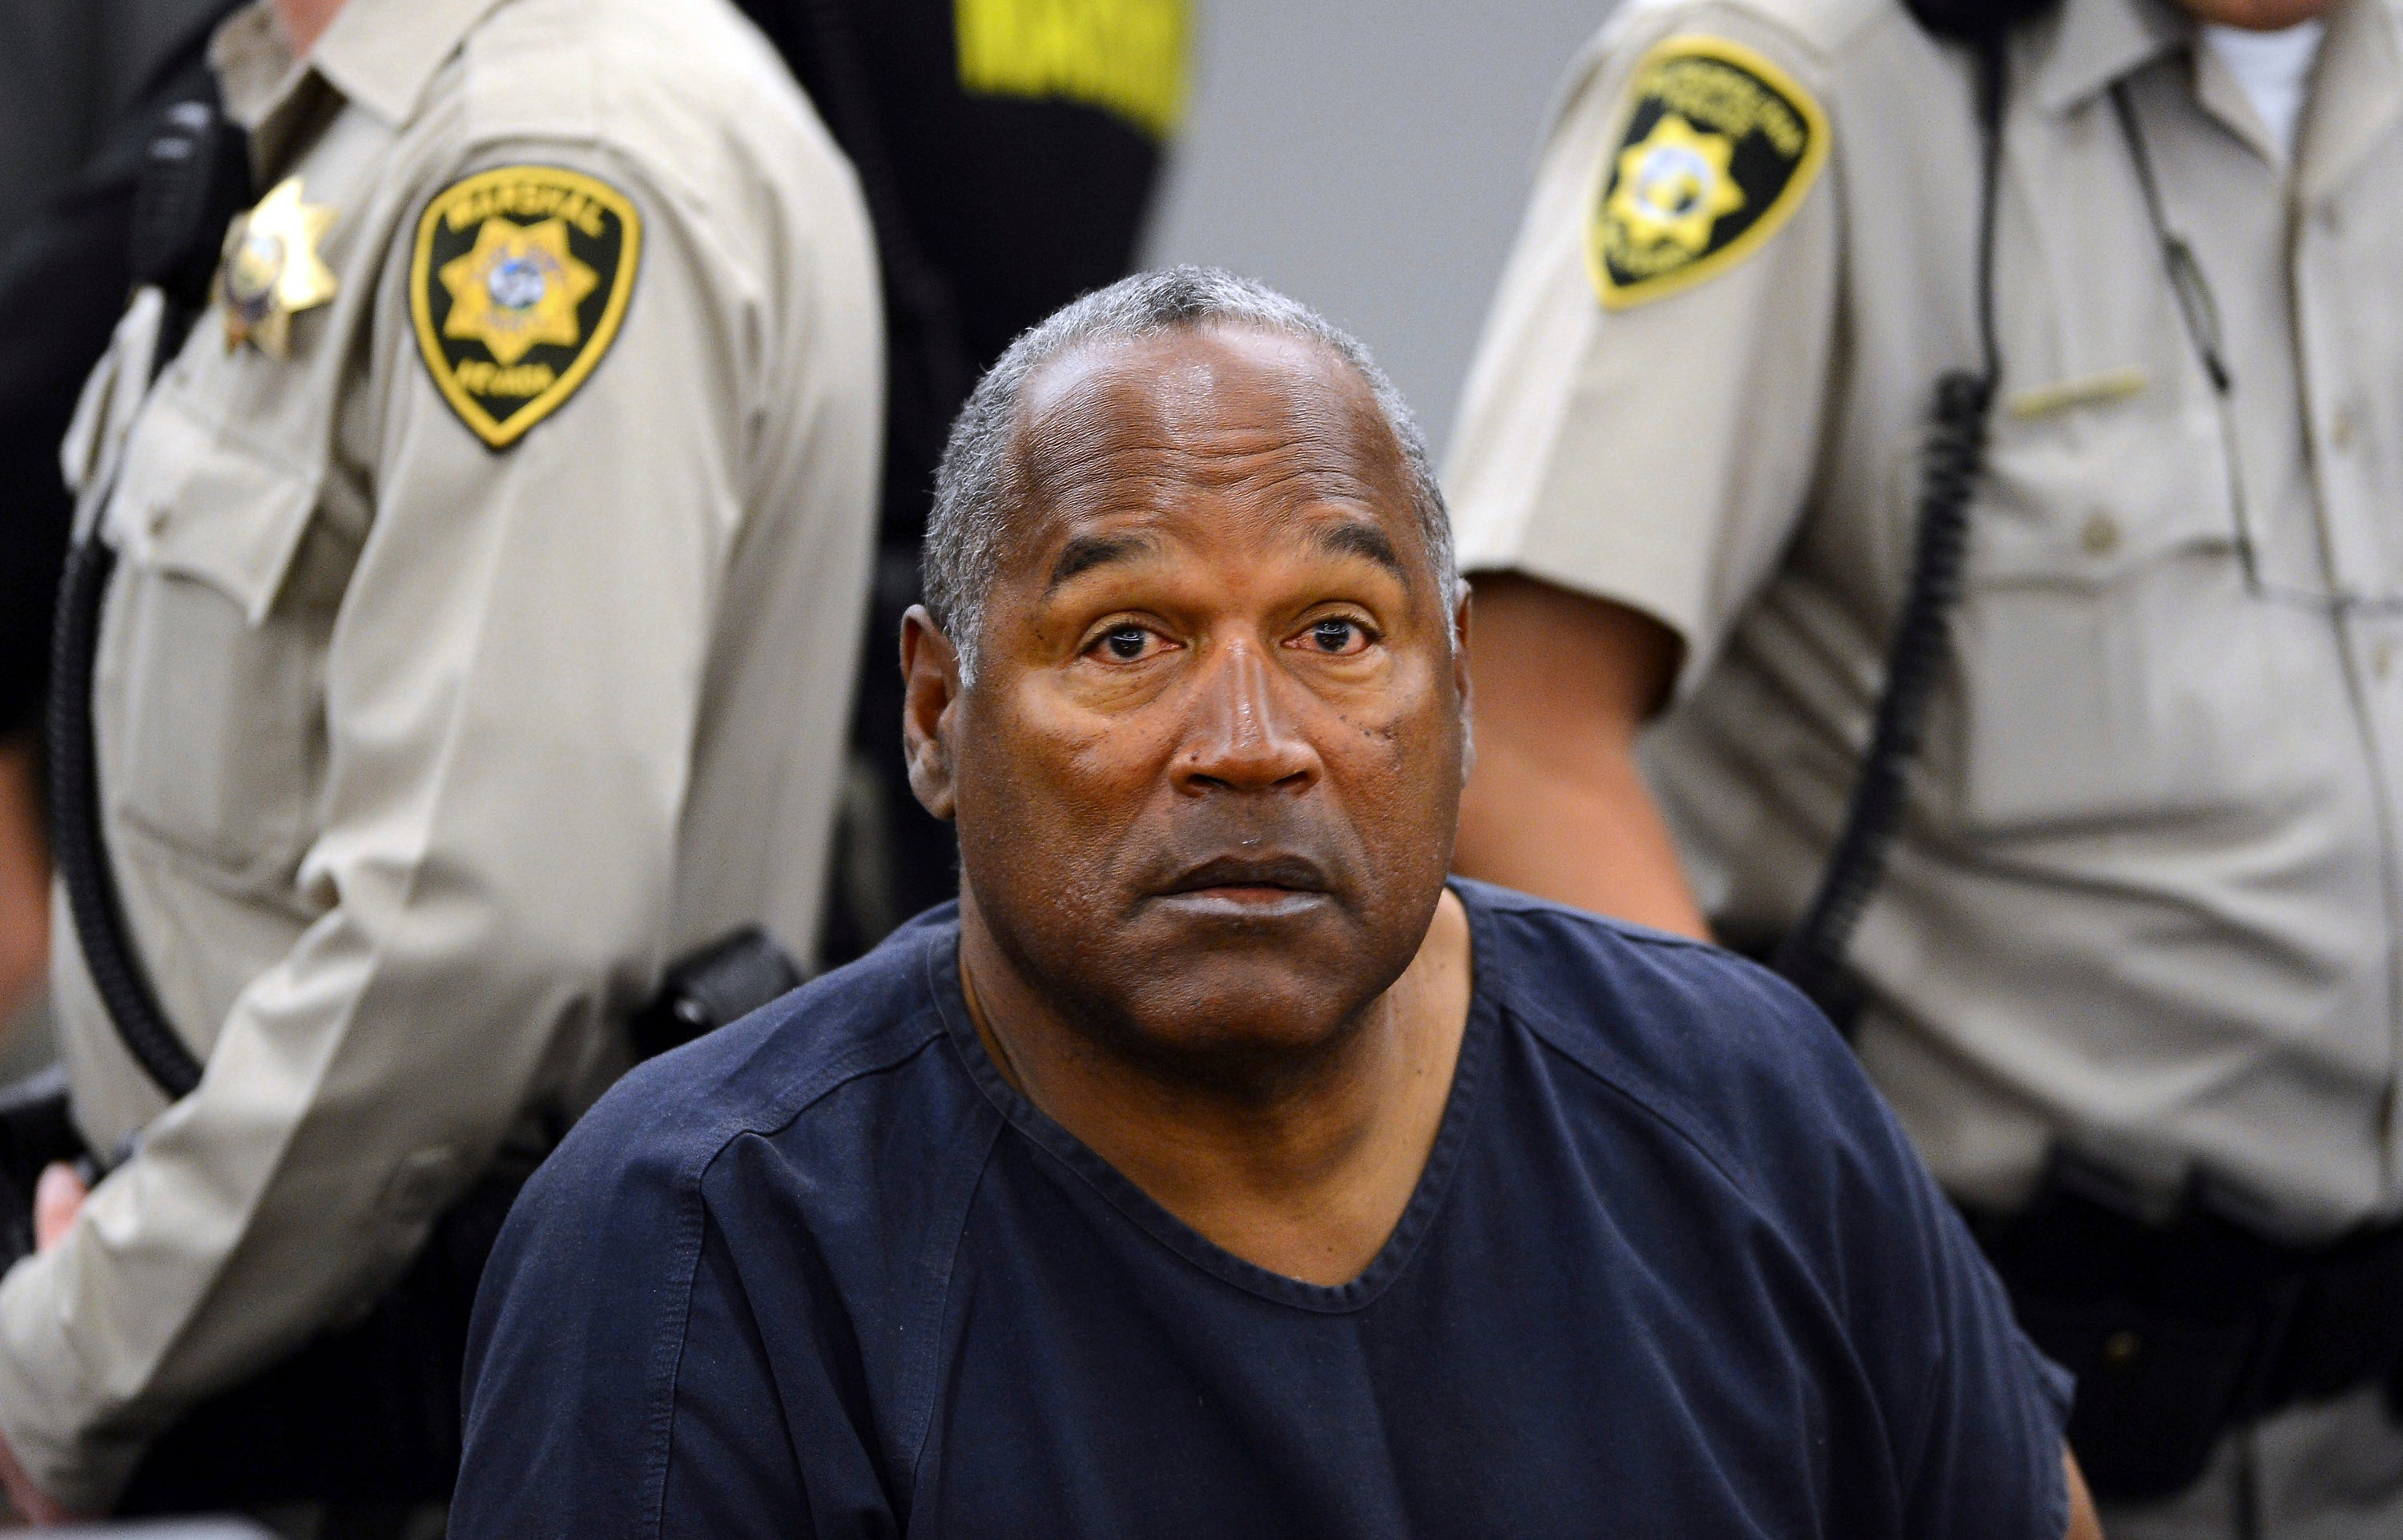 O.J. Simpson sits during a break on the second day of an evidentiary hearing in Clark County District Court in Las Vegas. Fred Goldman, the father of Ron Goldman, is once again trying to collect on a 1997 wrongful death lawsuit he won against Simpson for the death of his son by filing a creditor claim against Simpson’s Las Vegas estate